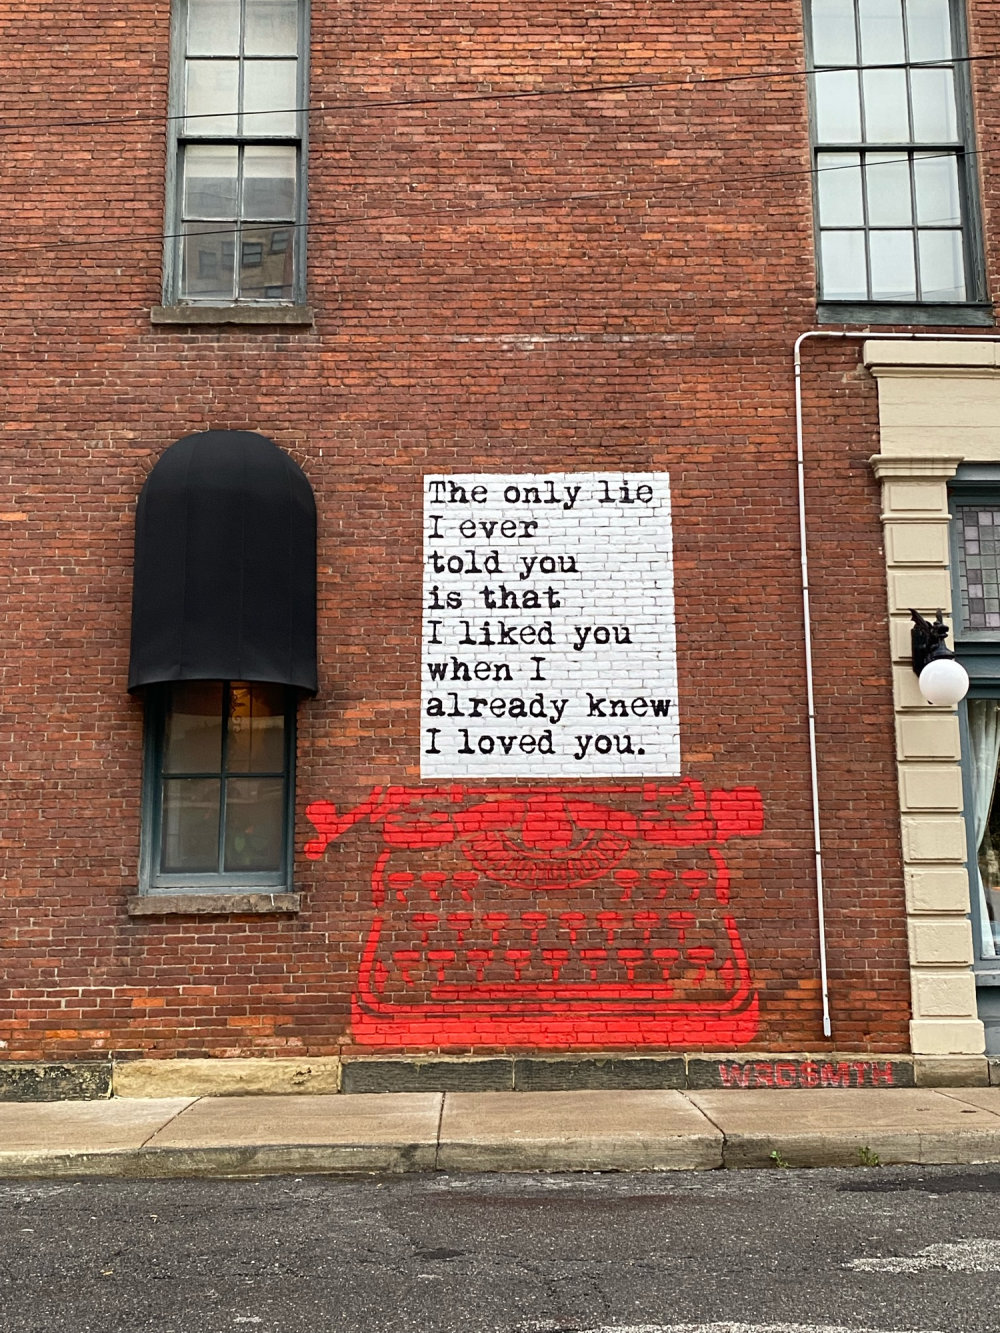 mural in Cleveland by artist WRDSMTH.